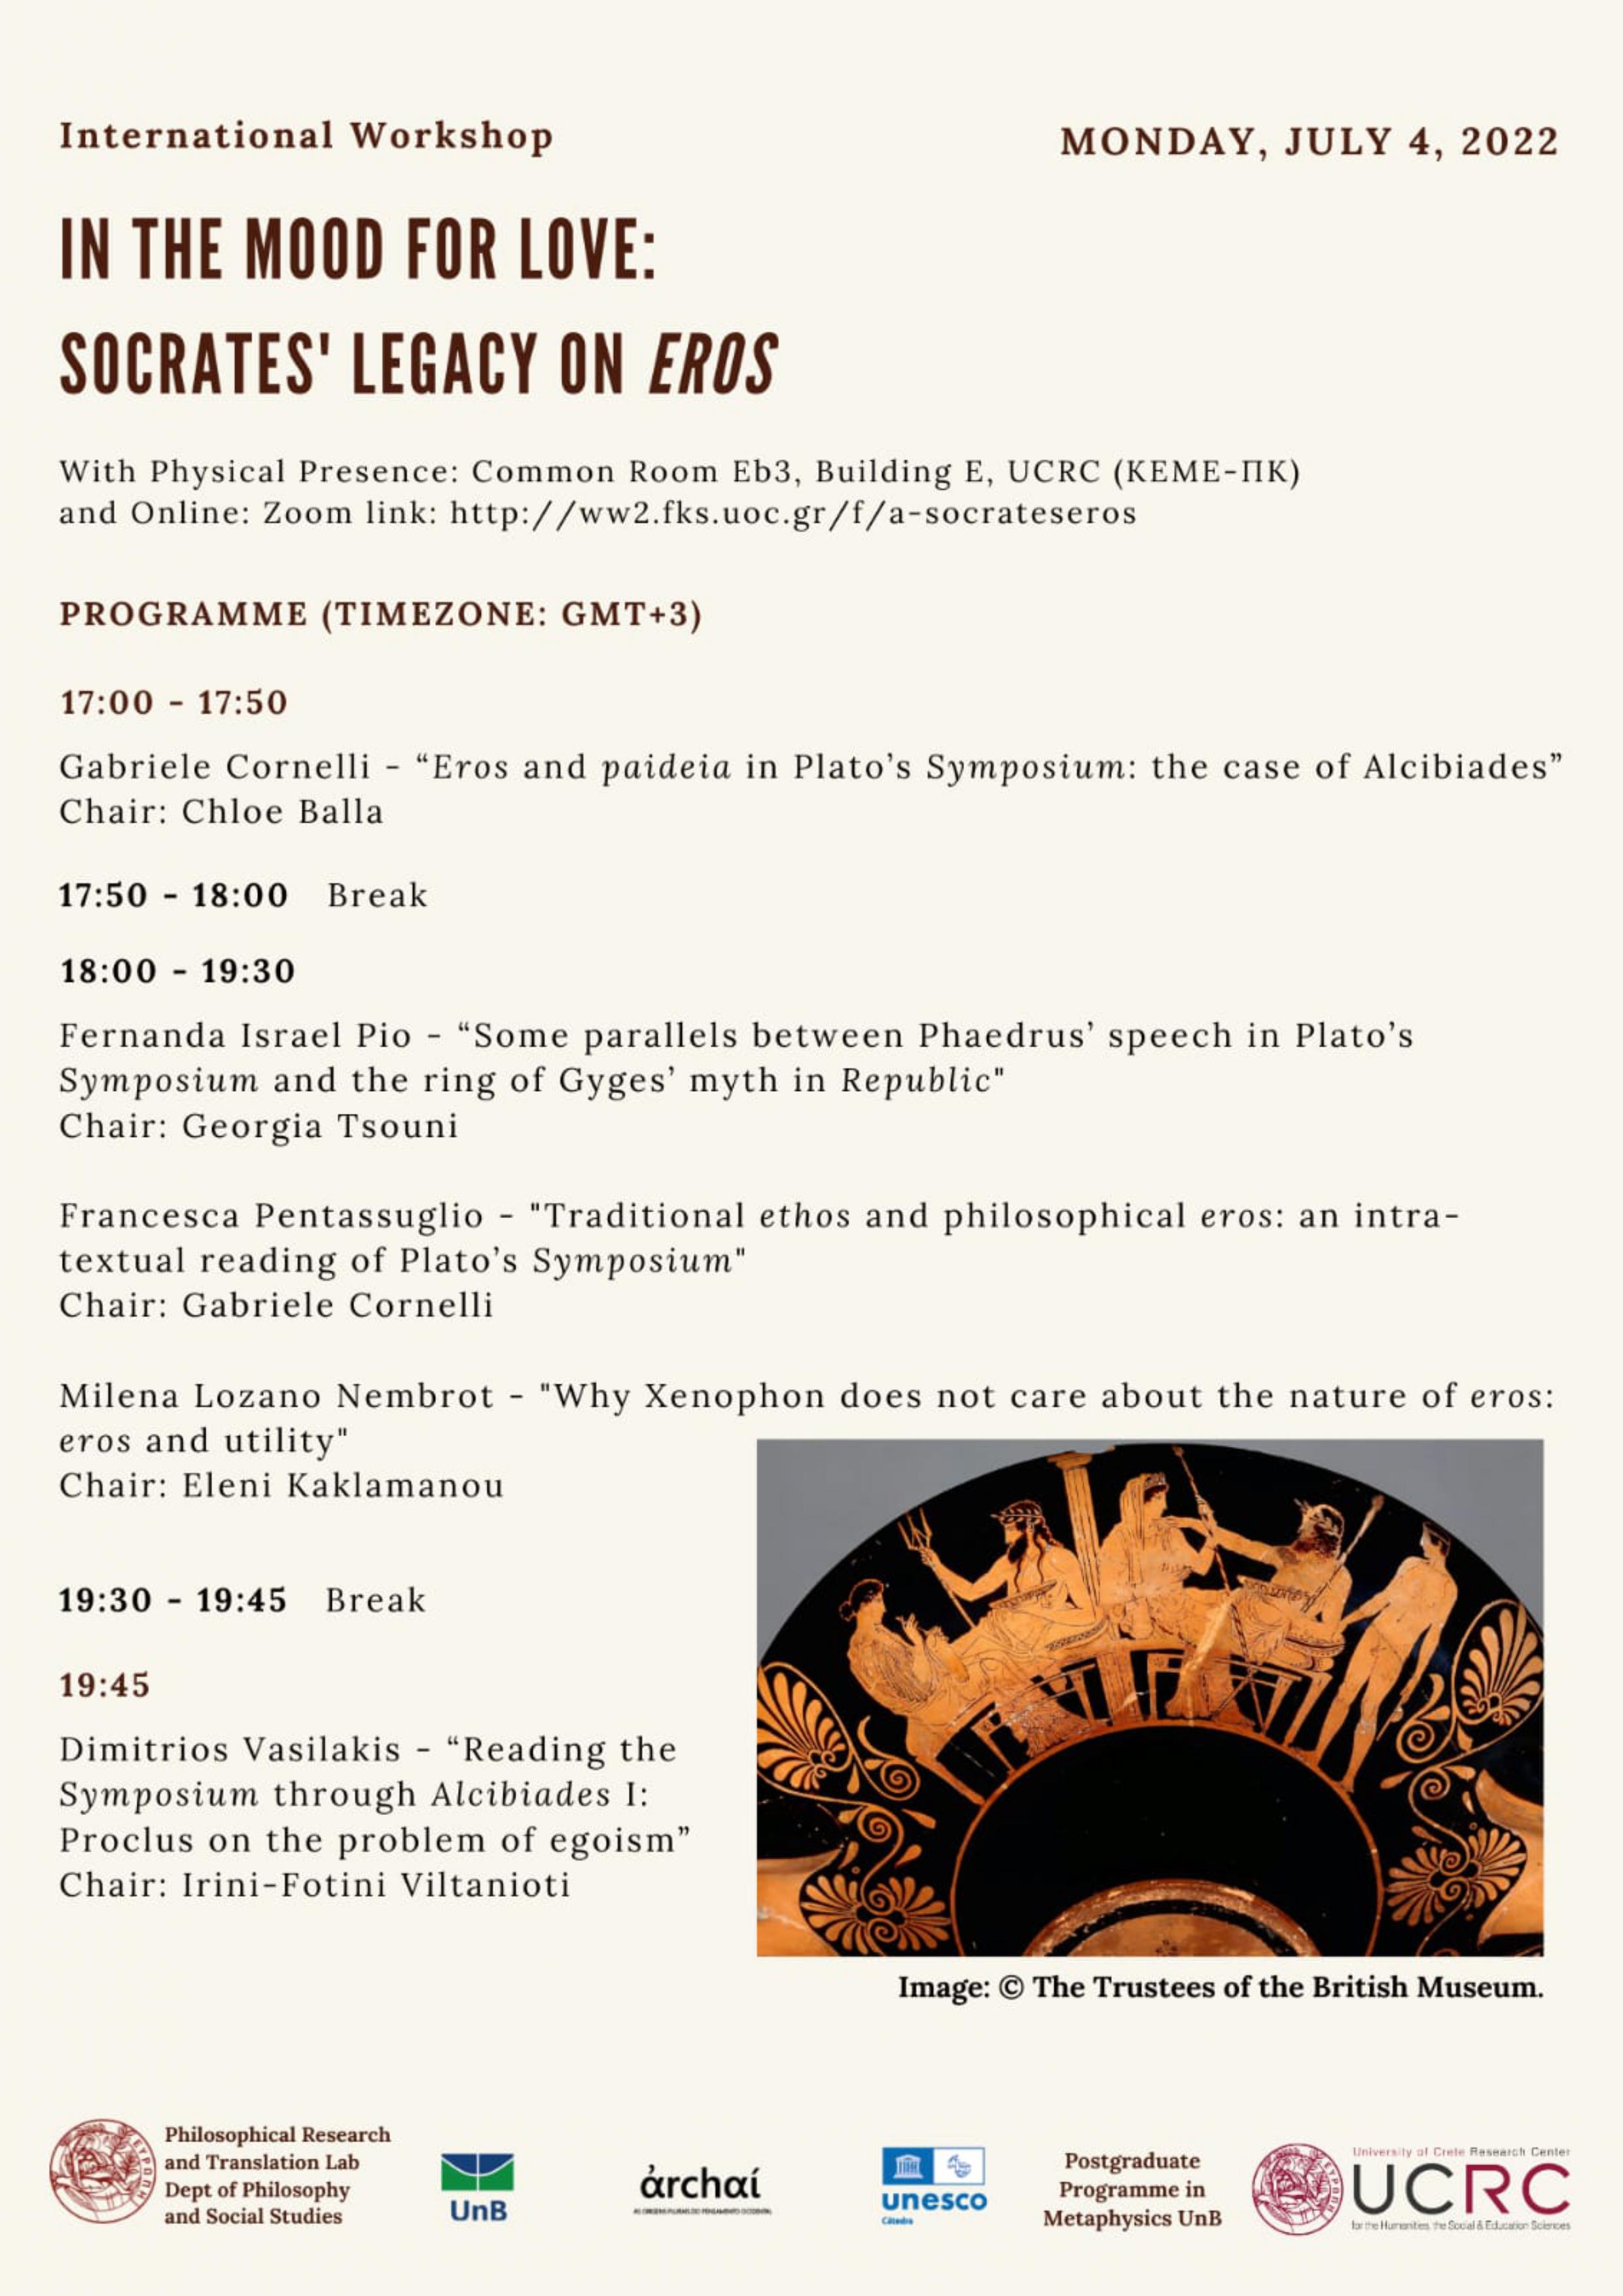 IN THE MOOD FOR LOVE: SOCRATES' LEGACY ON EROS - International Workshop